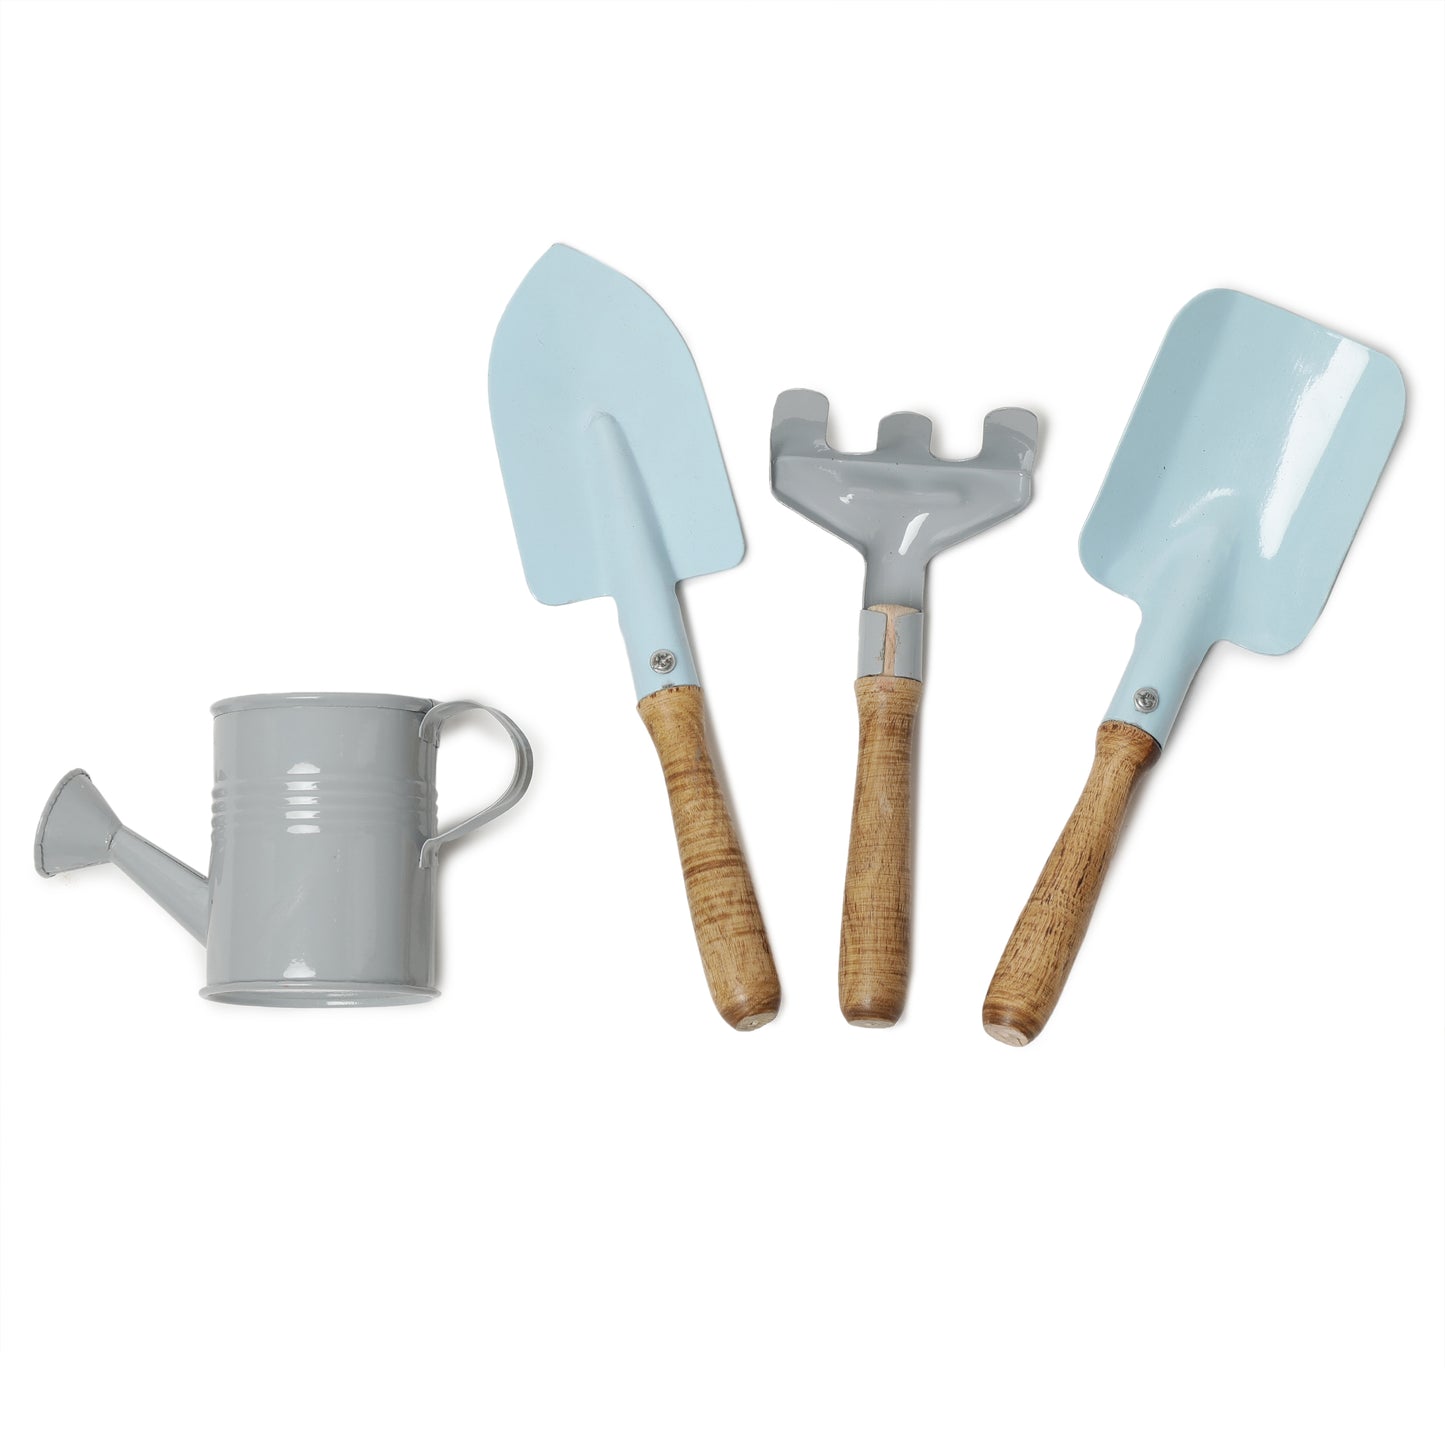 Little Greenkeepers' Gardening tools kit with mini Watering Can for kids